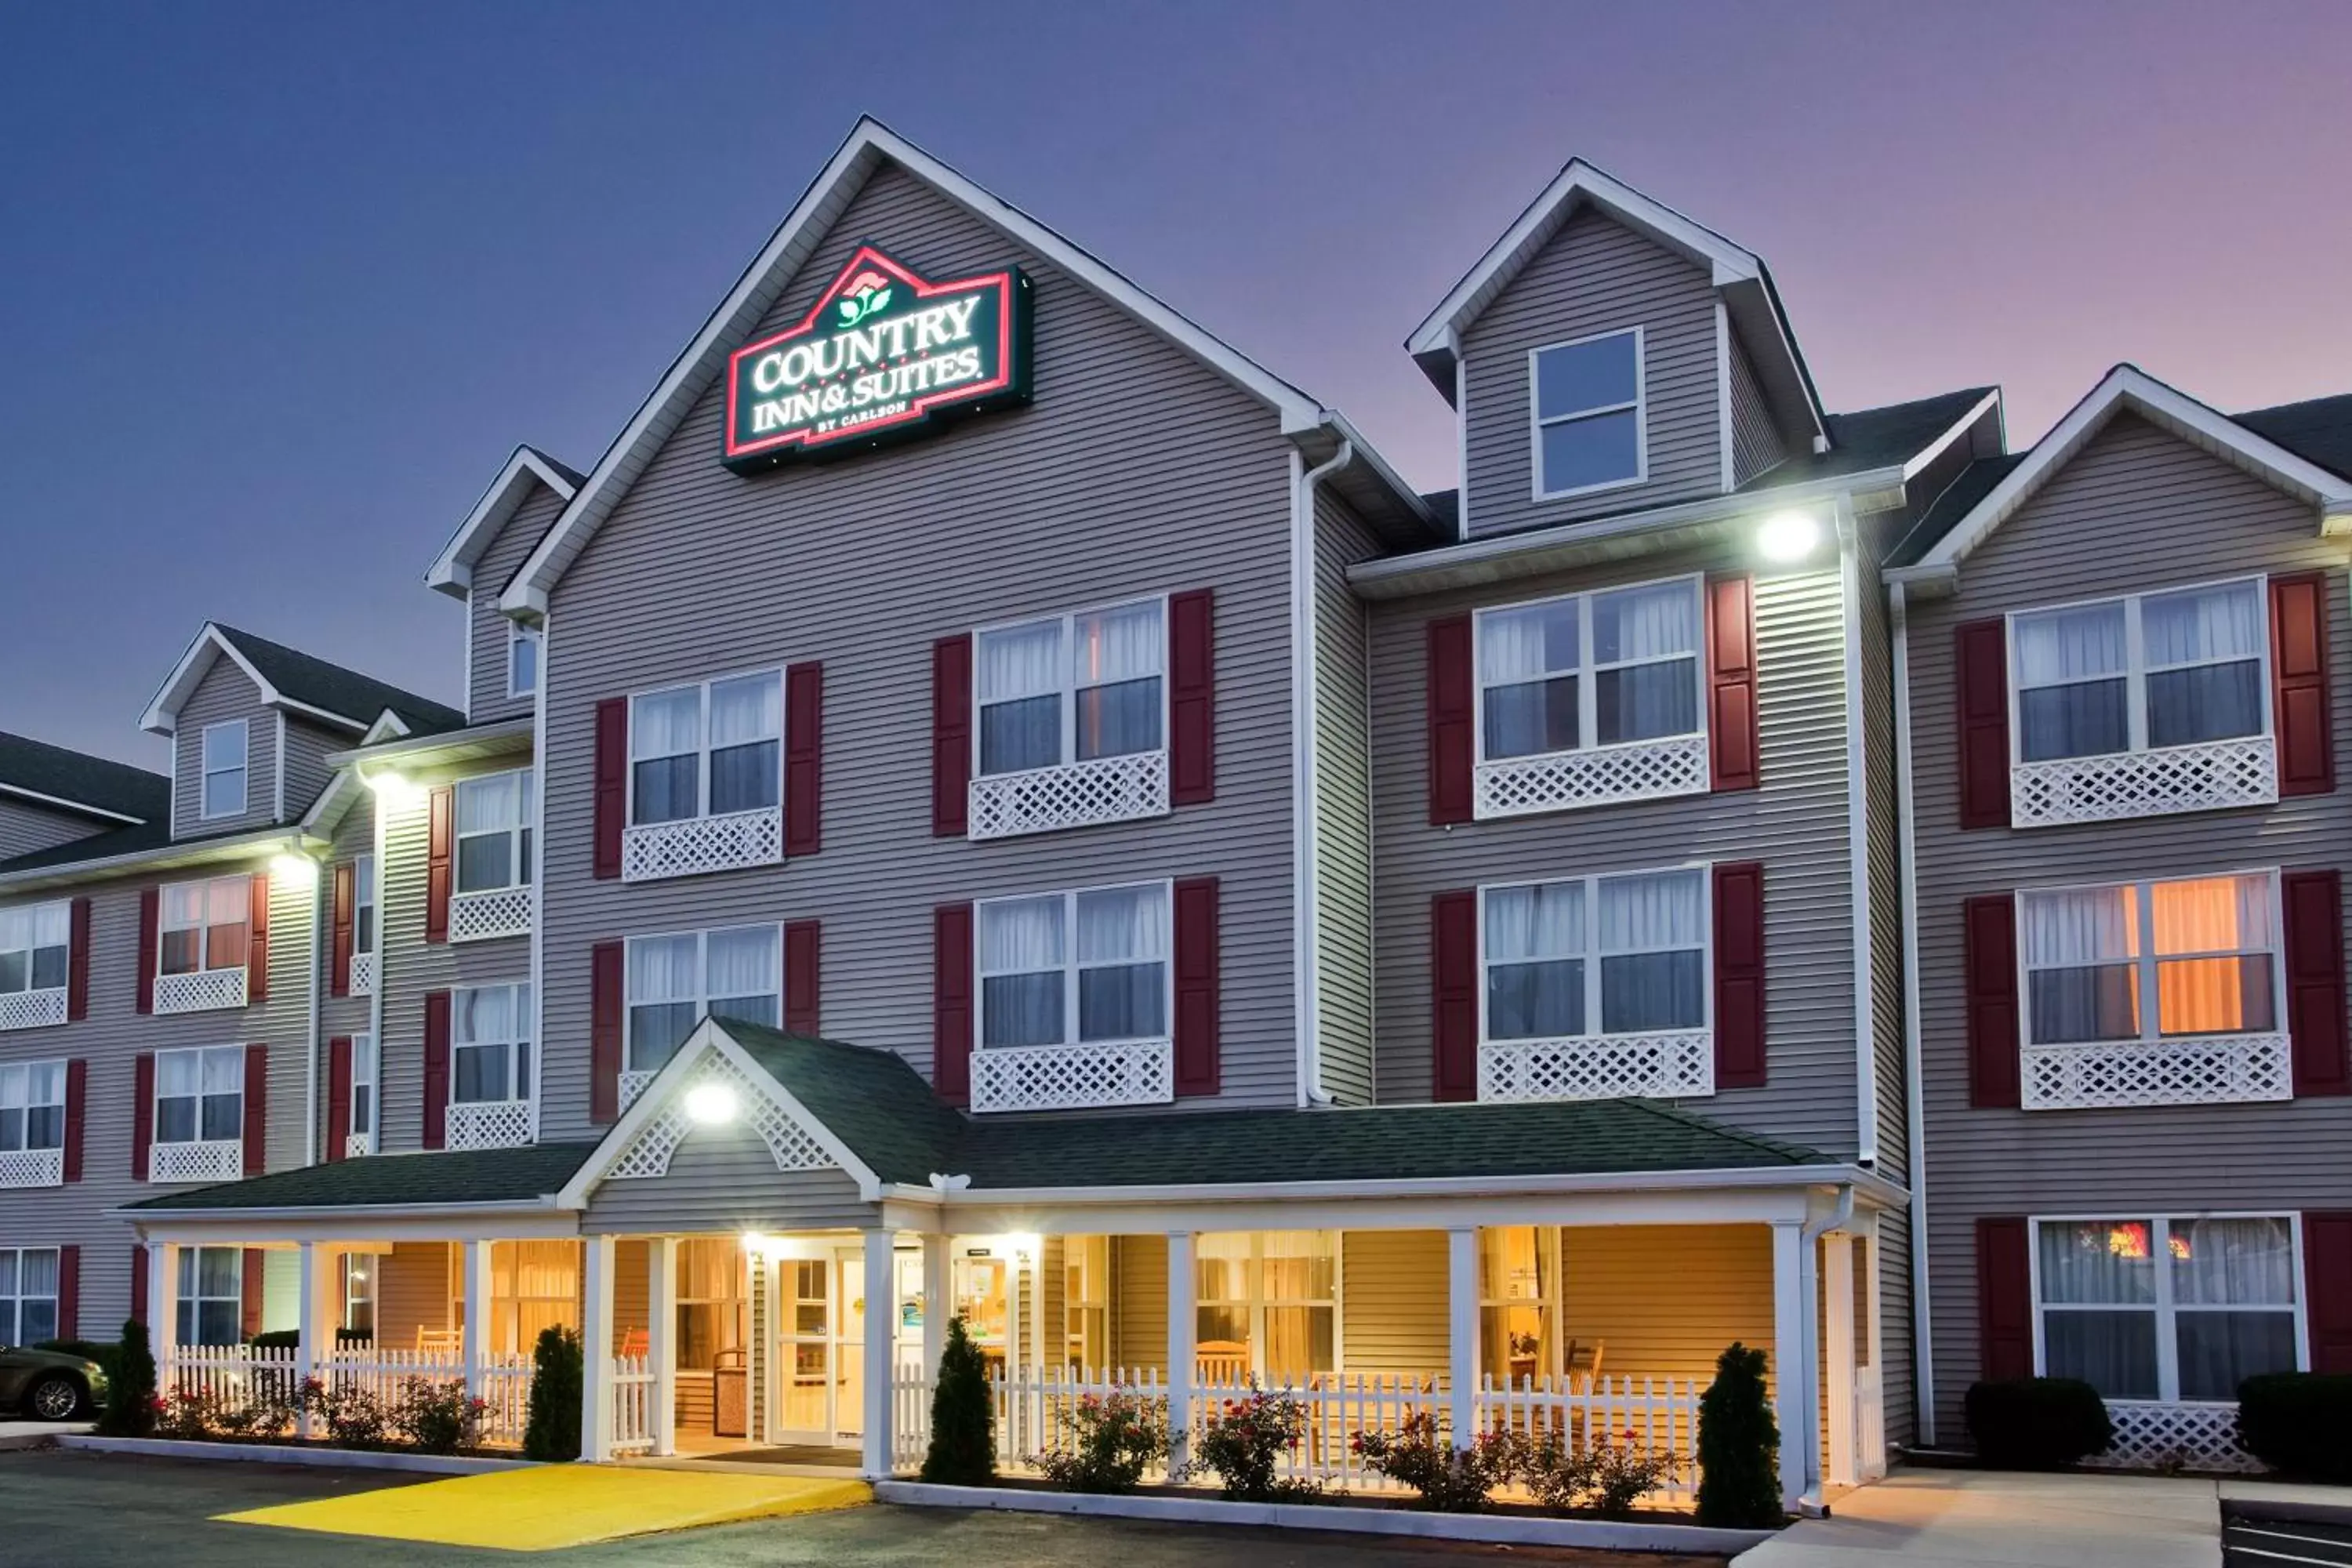 Facade/entrance, Property Building in Country Inn & Suites by Radisson, Hiram, GA